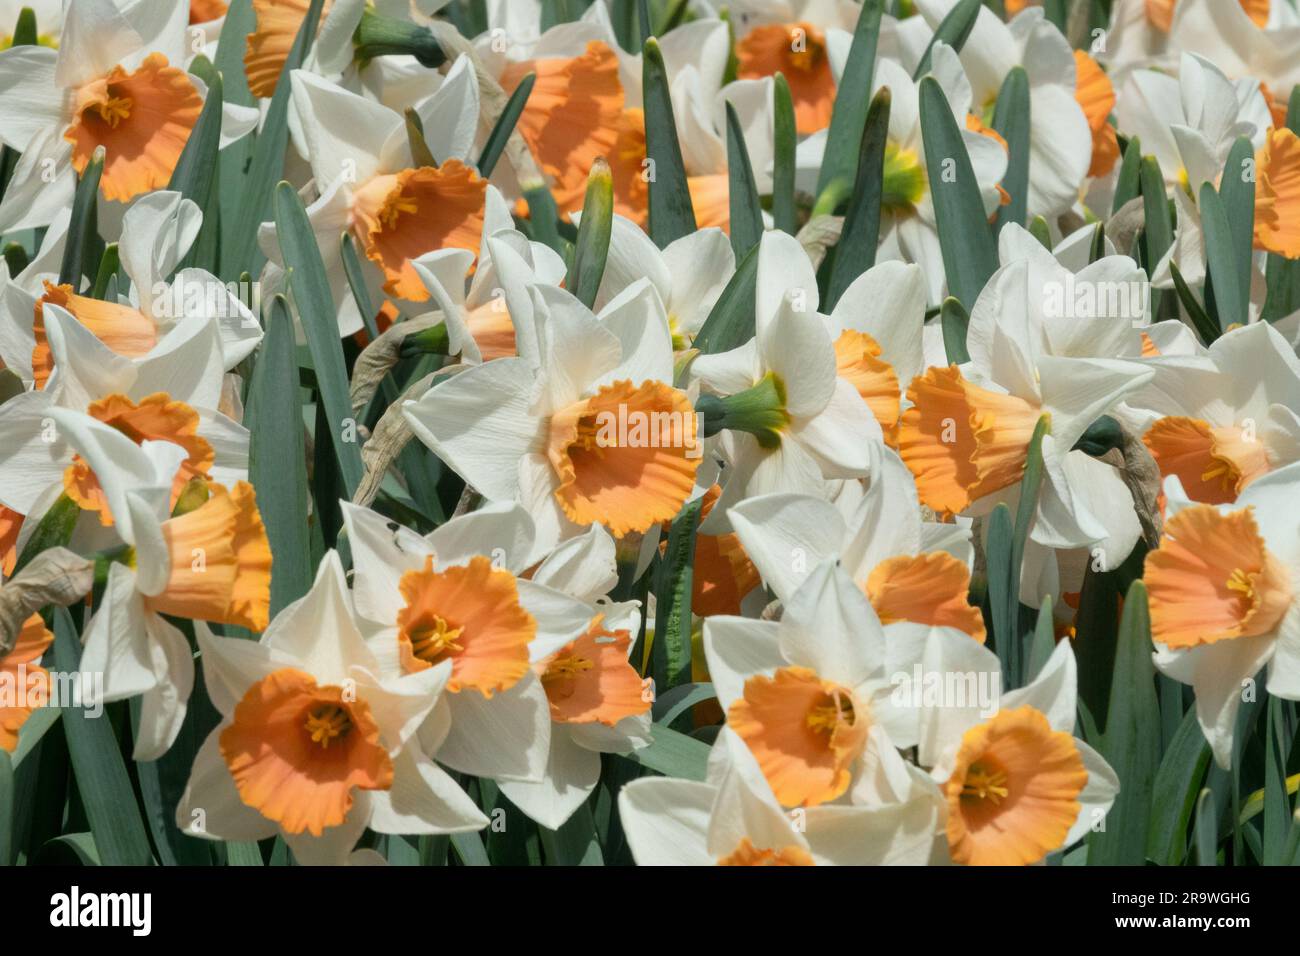 Daffodils Narcissus 'Accent', Large-cupped, Flowers, Spring, Narcissus Daffodils 'Accent' Stock Photo